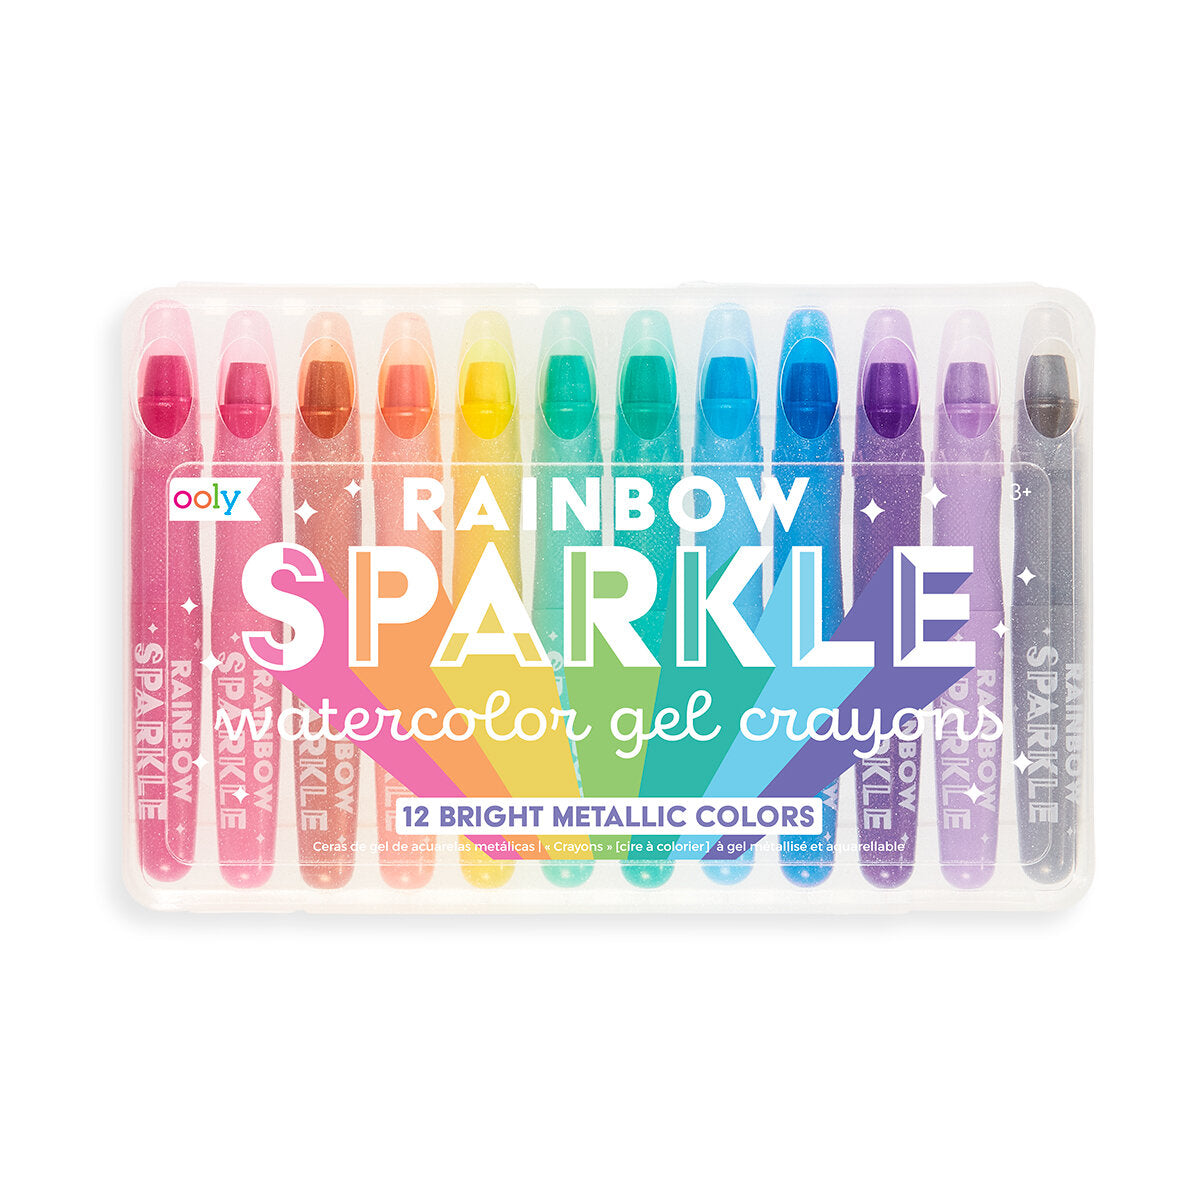 Ooly Rainbow Sparkle Watercolour Gel Crayons